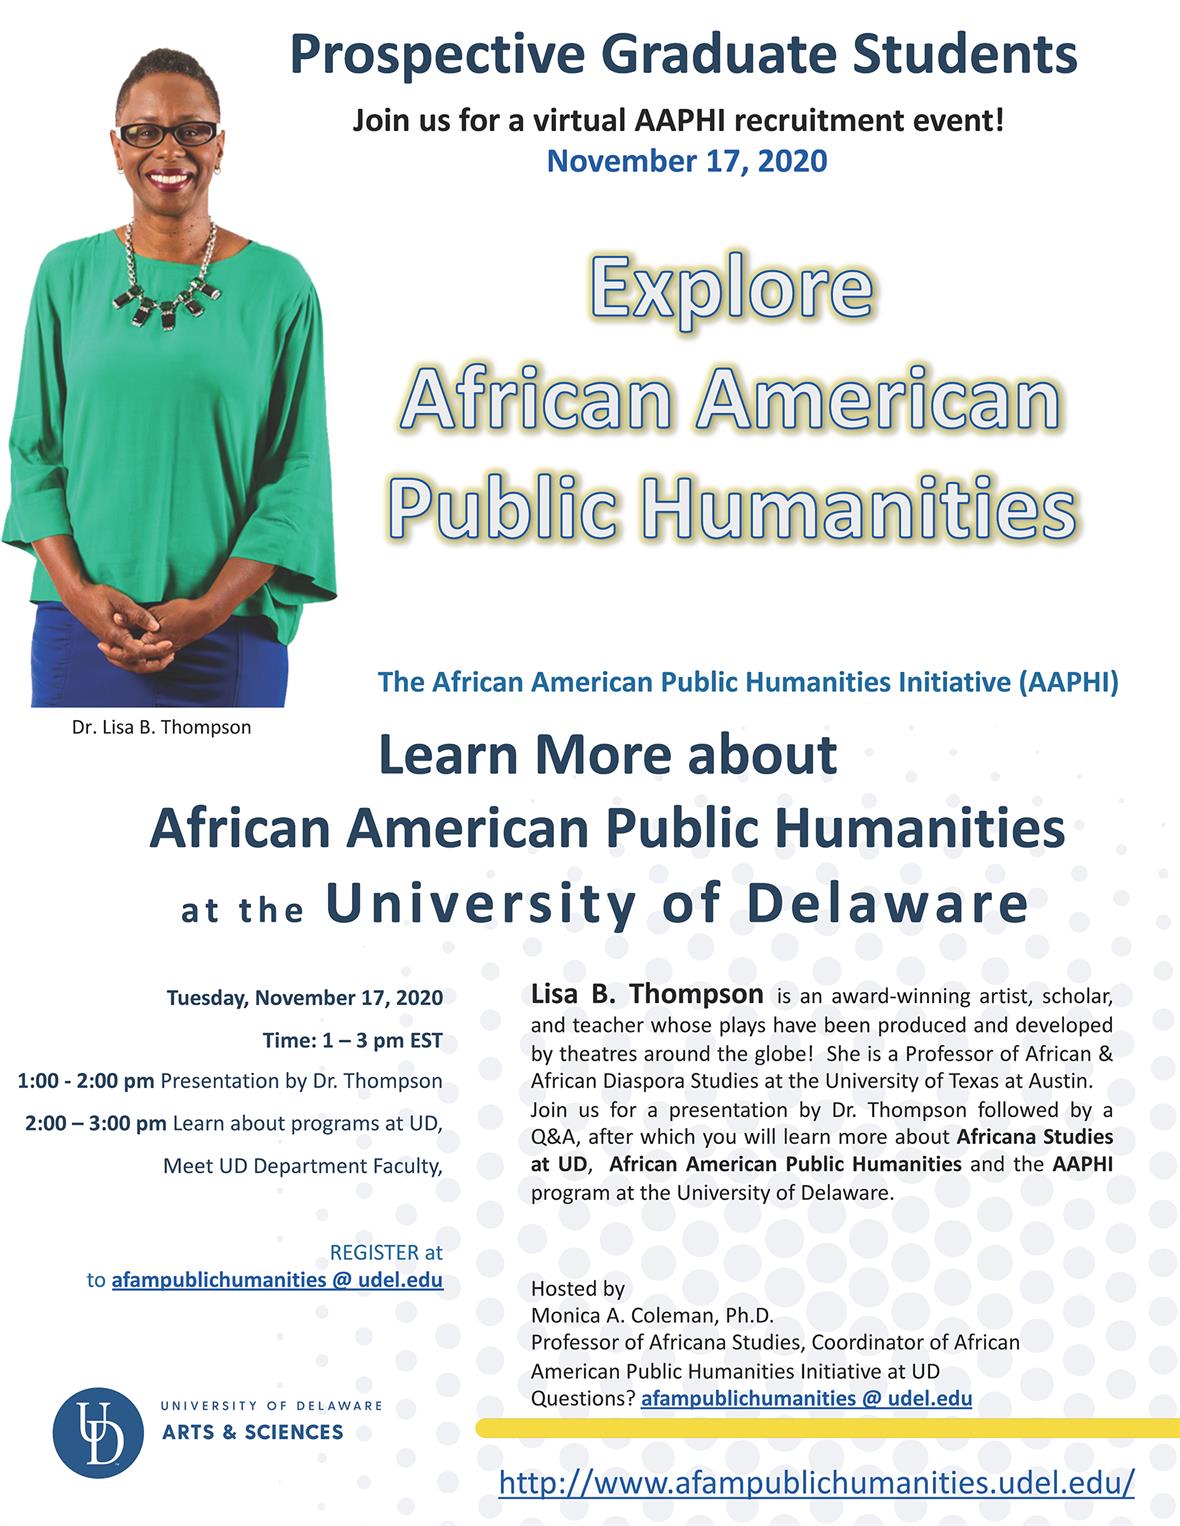 Poster for UD African American Public Humanities Initiative (AAPHI) is ideal for students interested in a PhD in the Humanities with an interest in African American history. 